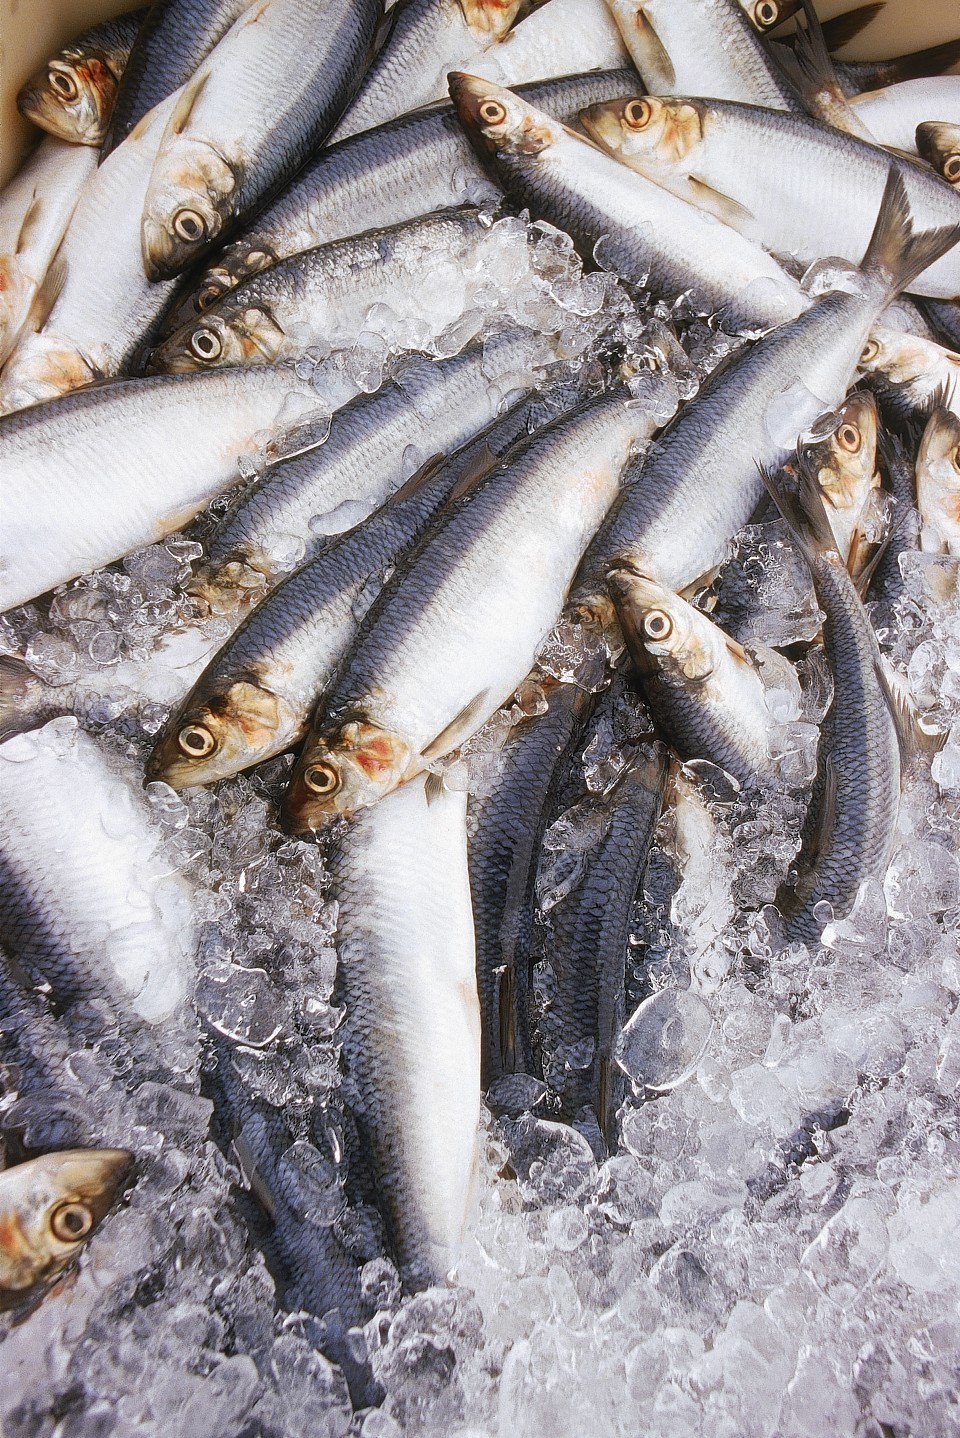 Herring is at the heart of the row over trade sanctions